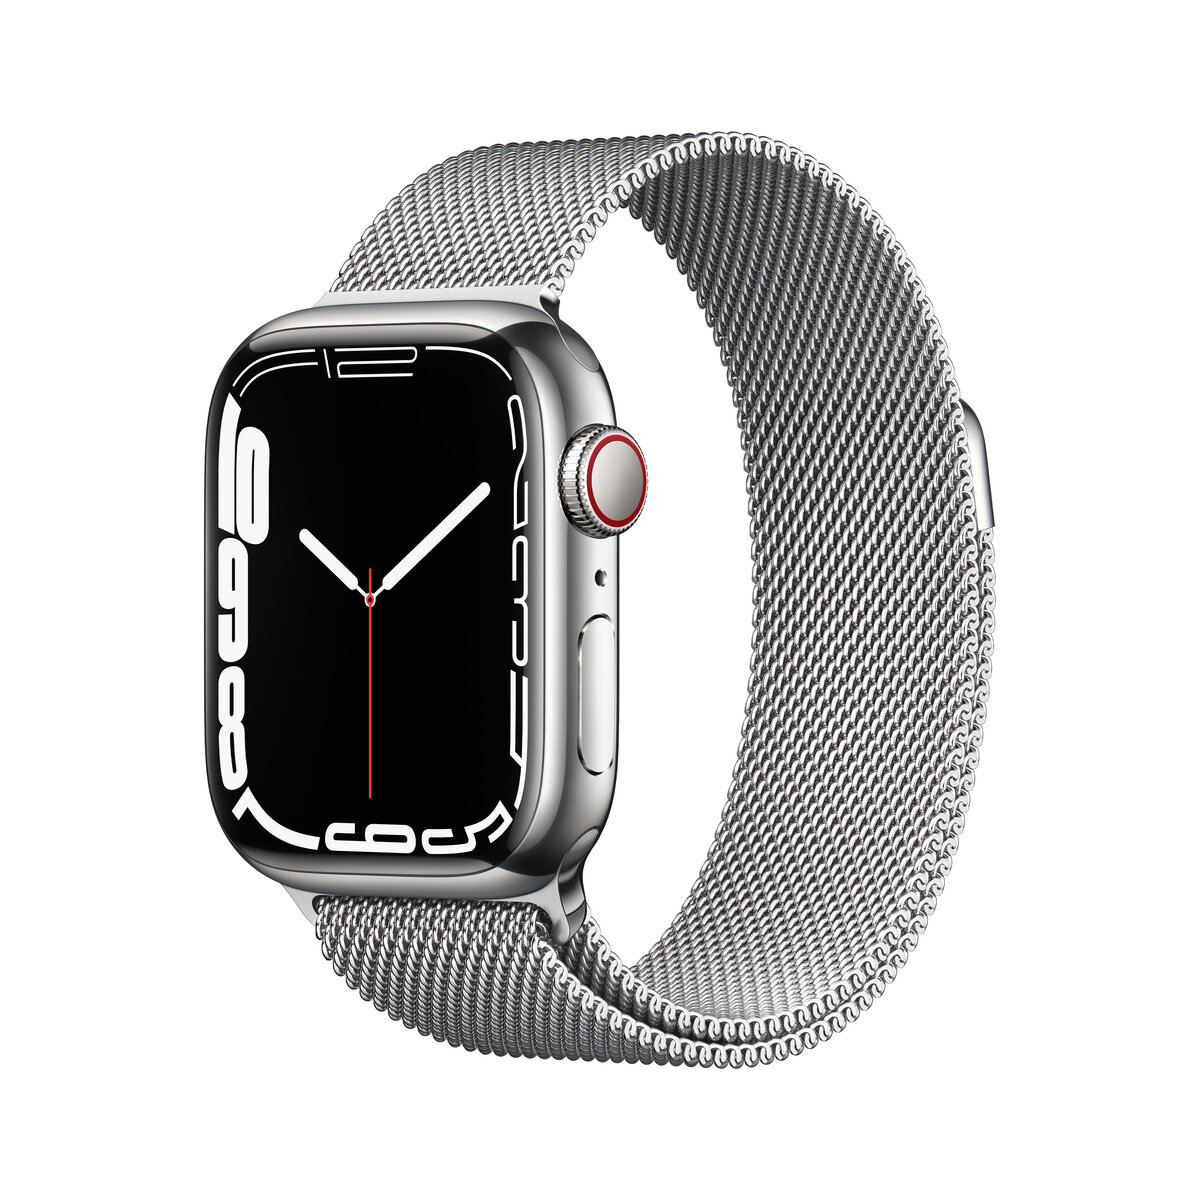 Buy Apple Watch Series 7 GPS + Cellular, 45mm Stainless Steel Case at costco.co.uk